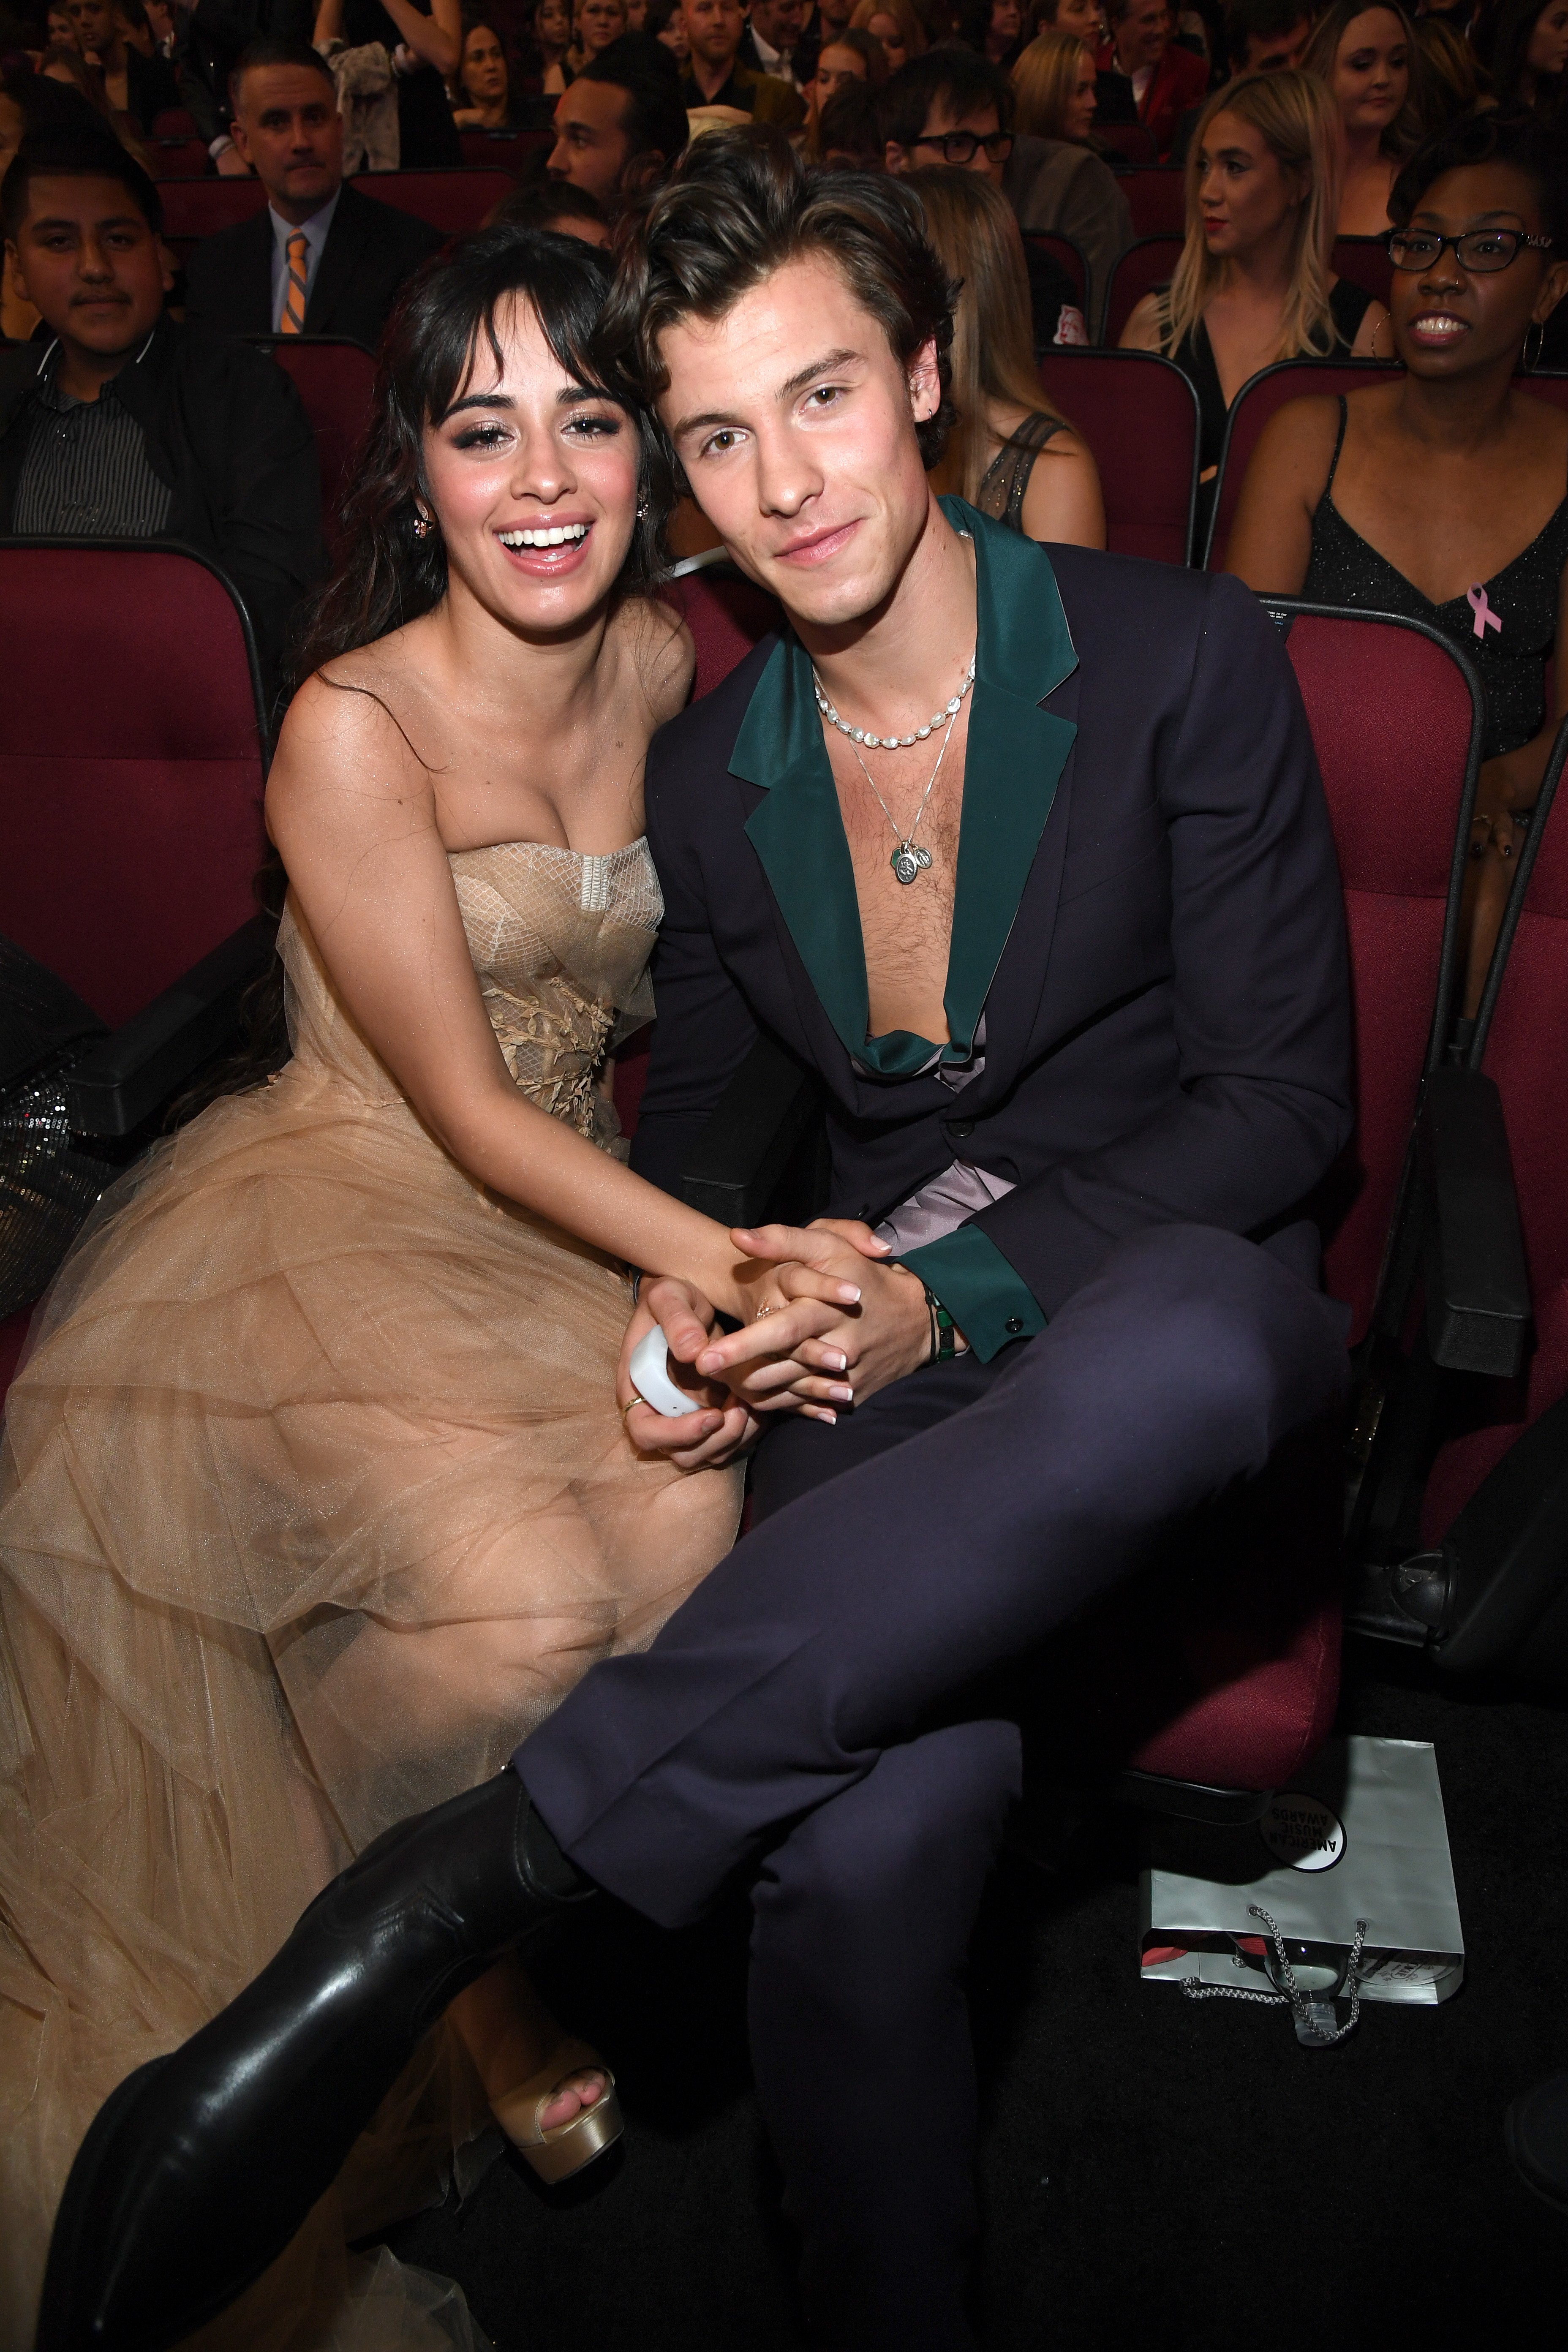 Camila Cabello and Shawn Mendes at the 2019 American Music Awards at Microsoft Theater in Los Angeles, California | Photo: Kevin Mazur/AMA2019/Getty Images